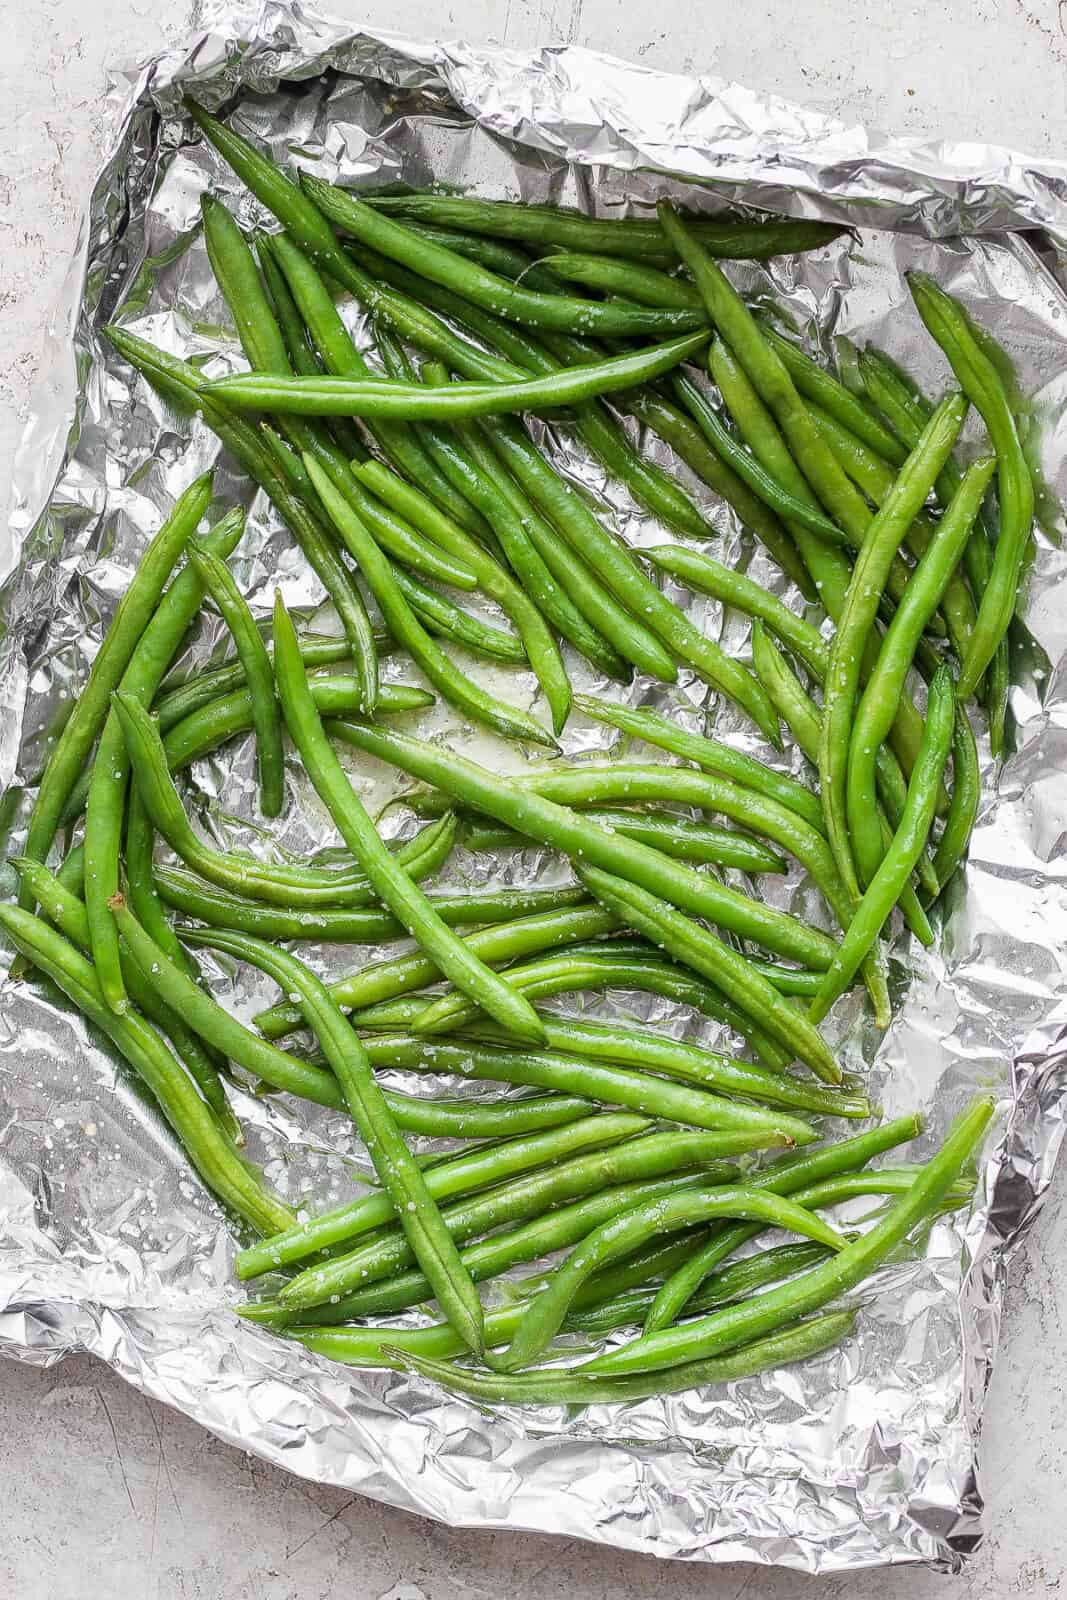 Green beans in foil after smoking. 